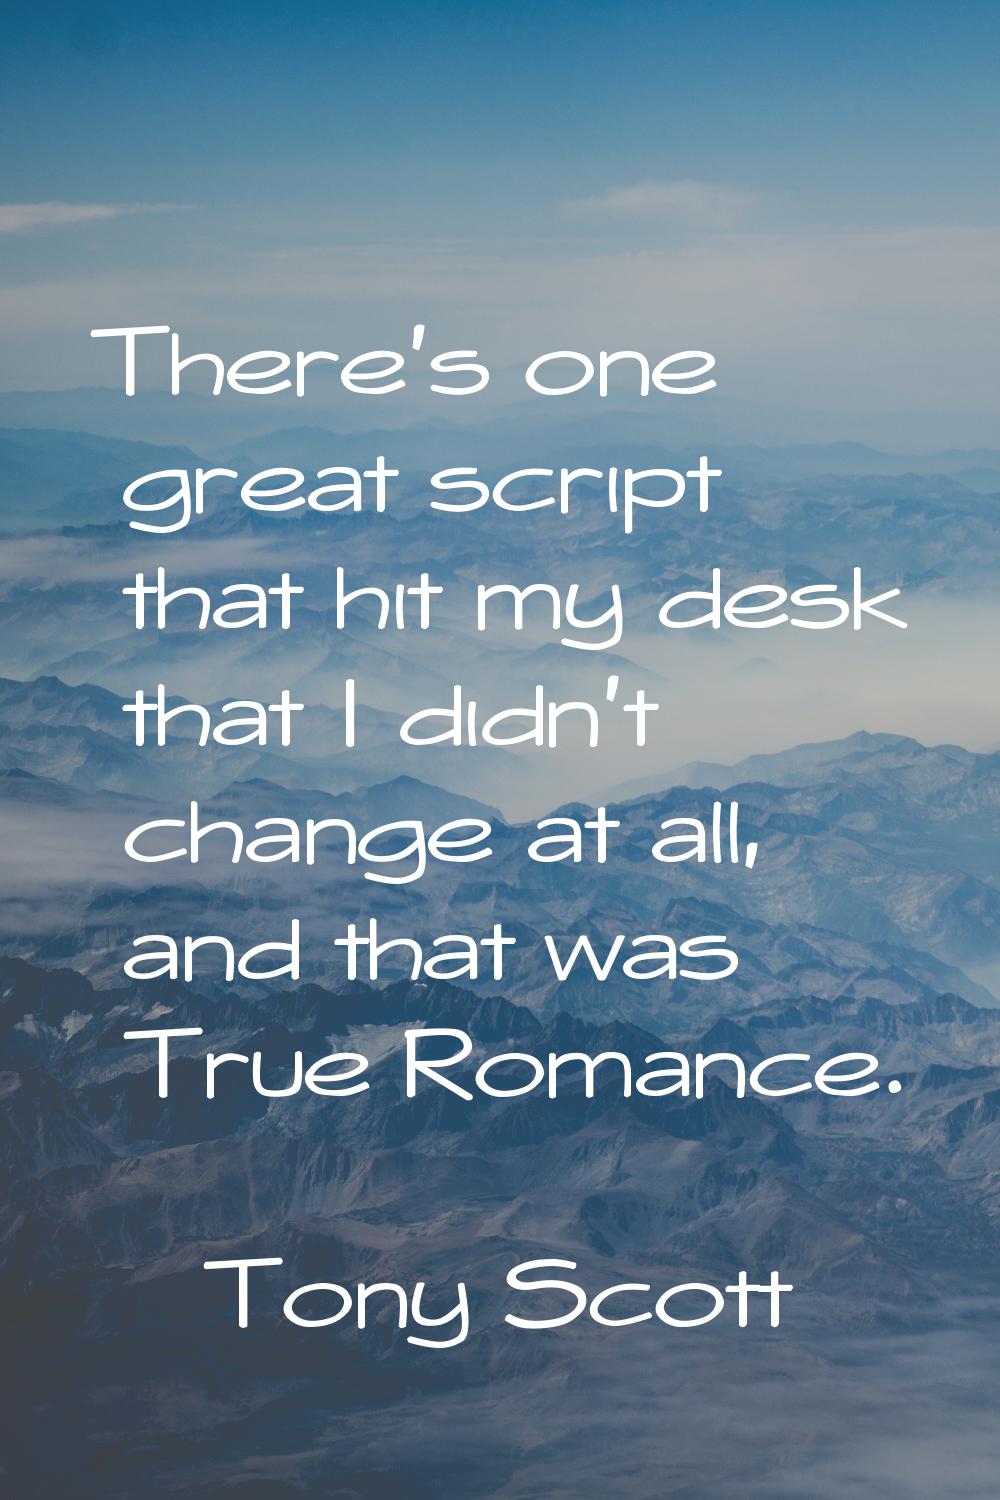 There's one great script that hit my desk that I didn't change at all, and that was True Romance.